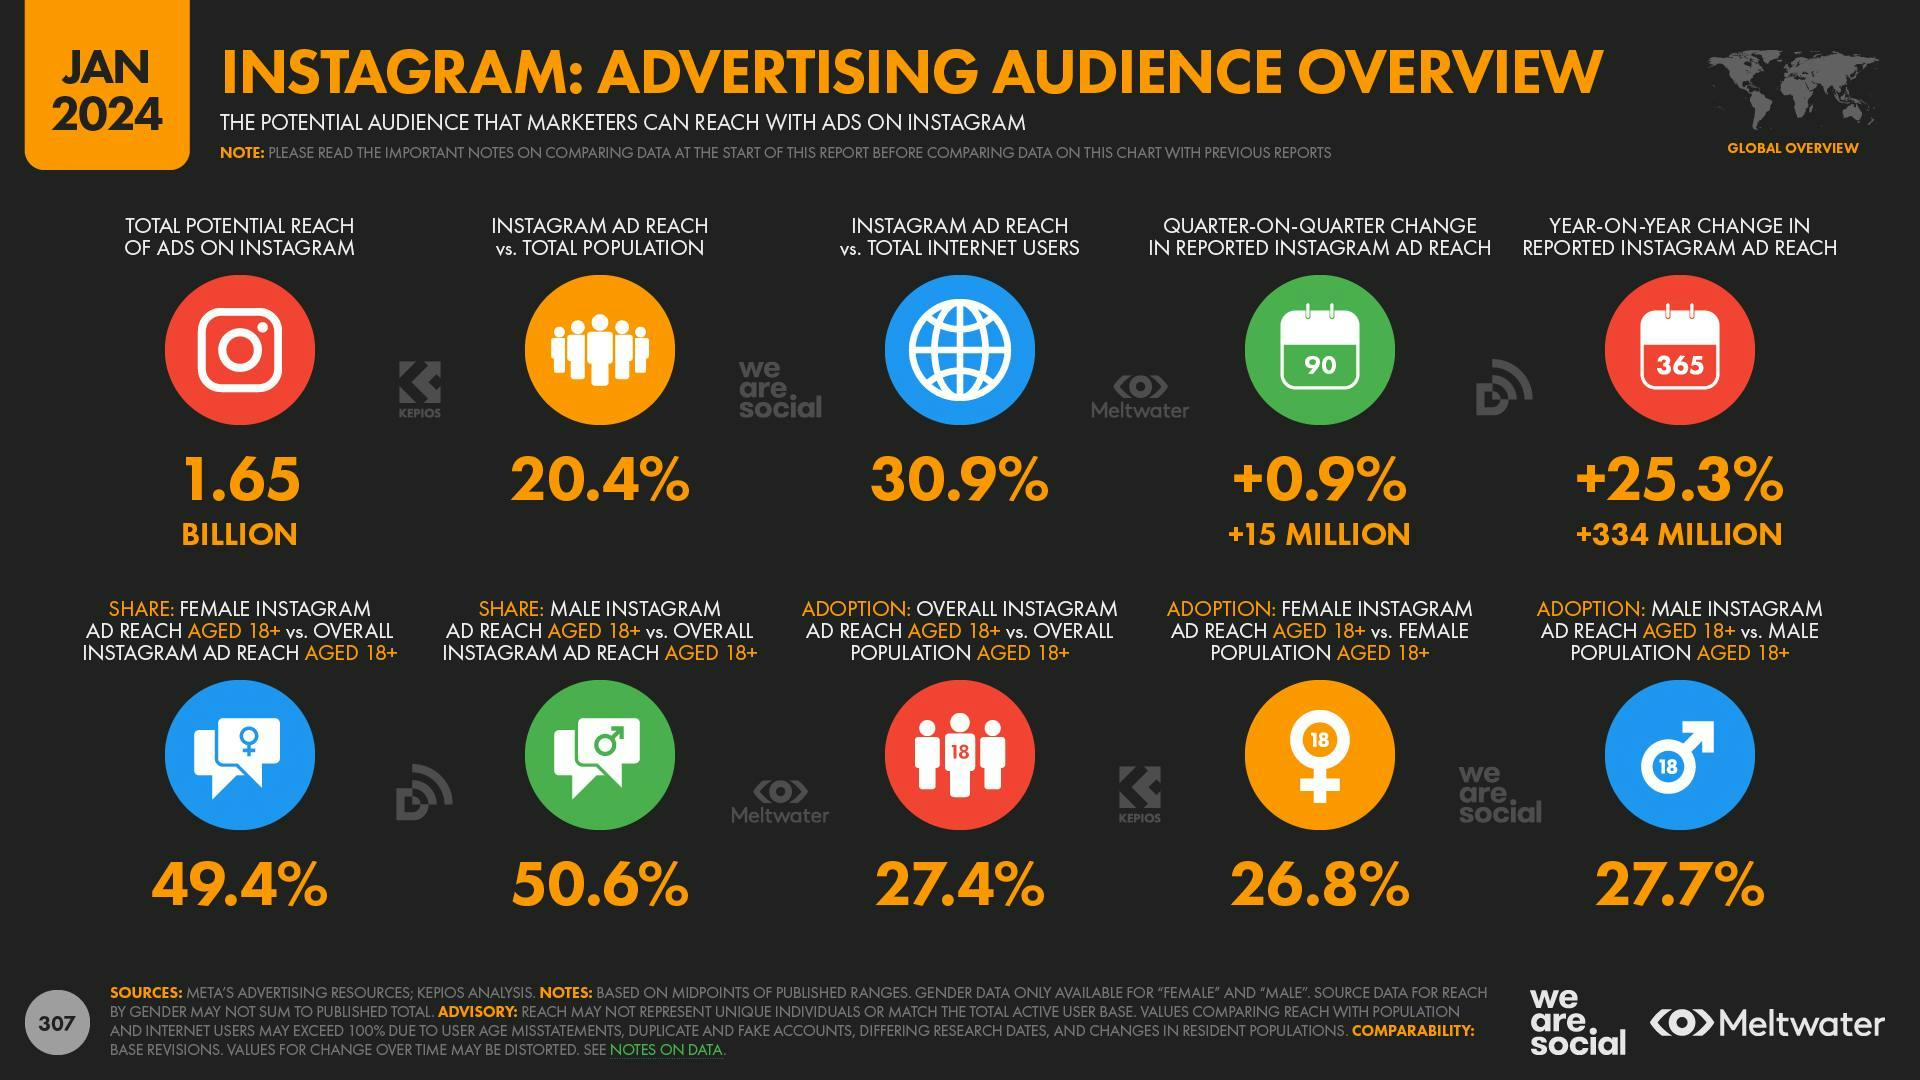 Instagram: Advertising audience overview